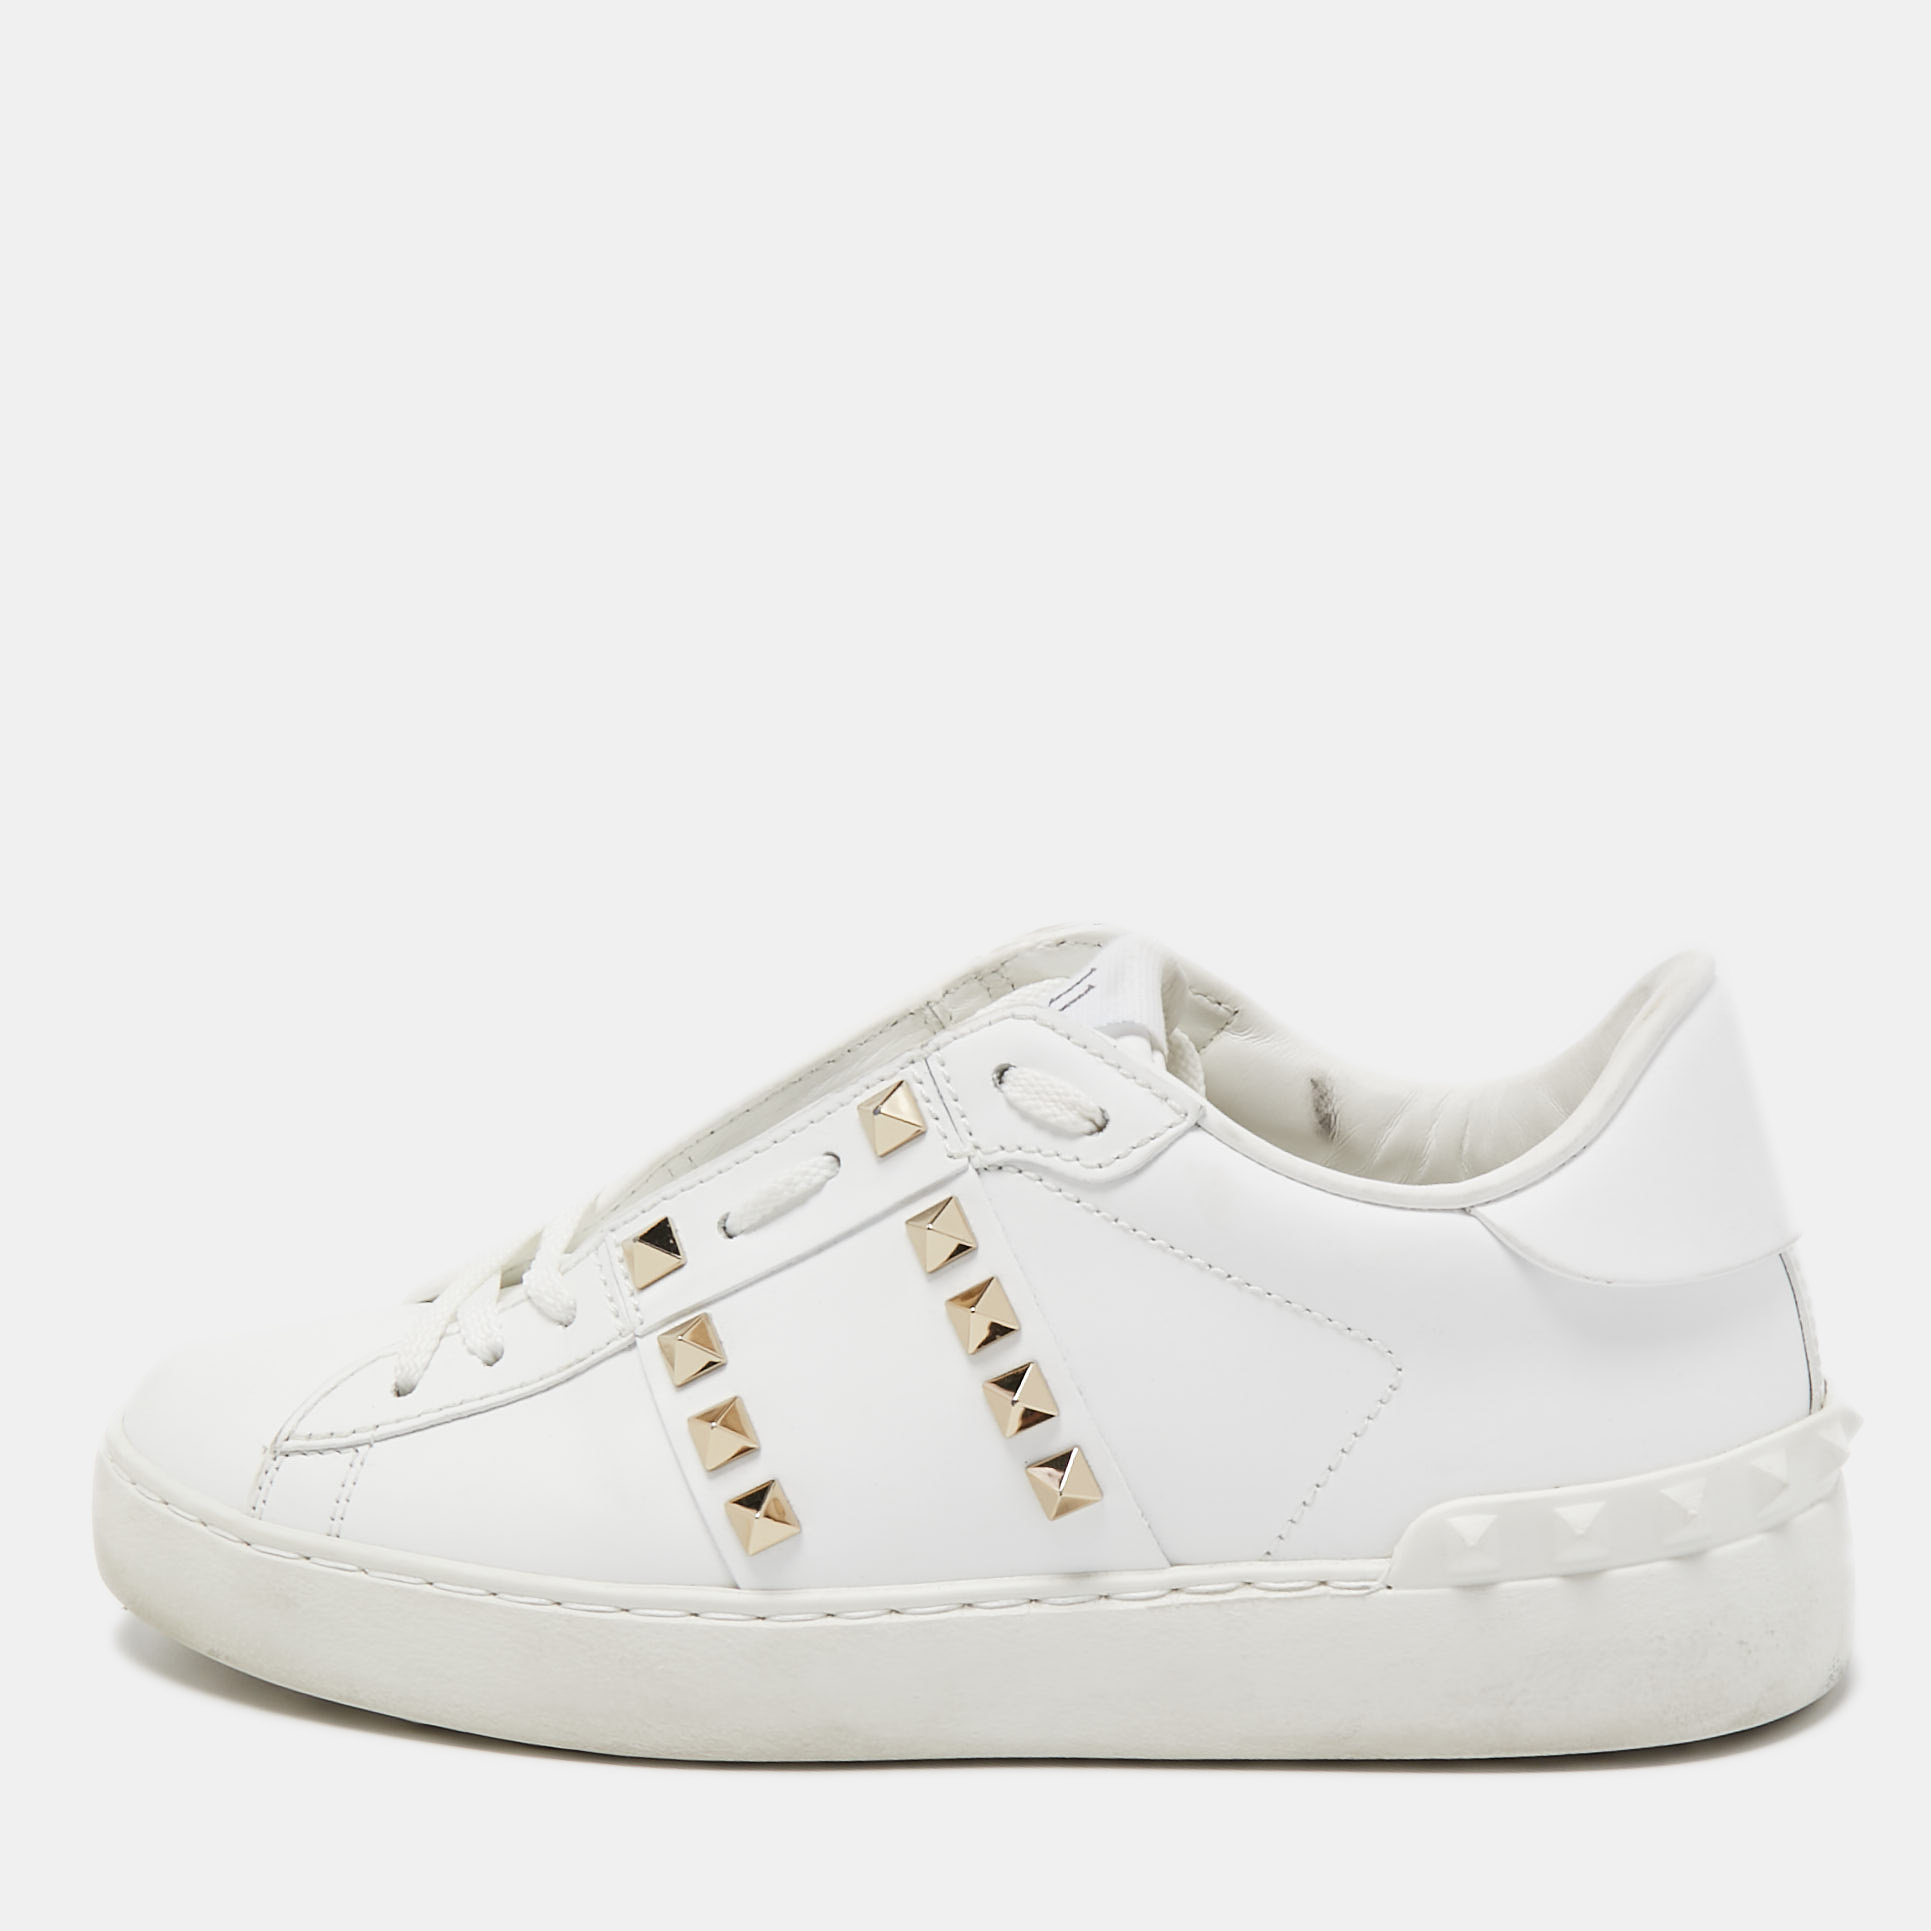 Valentino White Leather Rockstud Low Top Sneakers Size 35.5